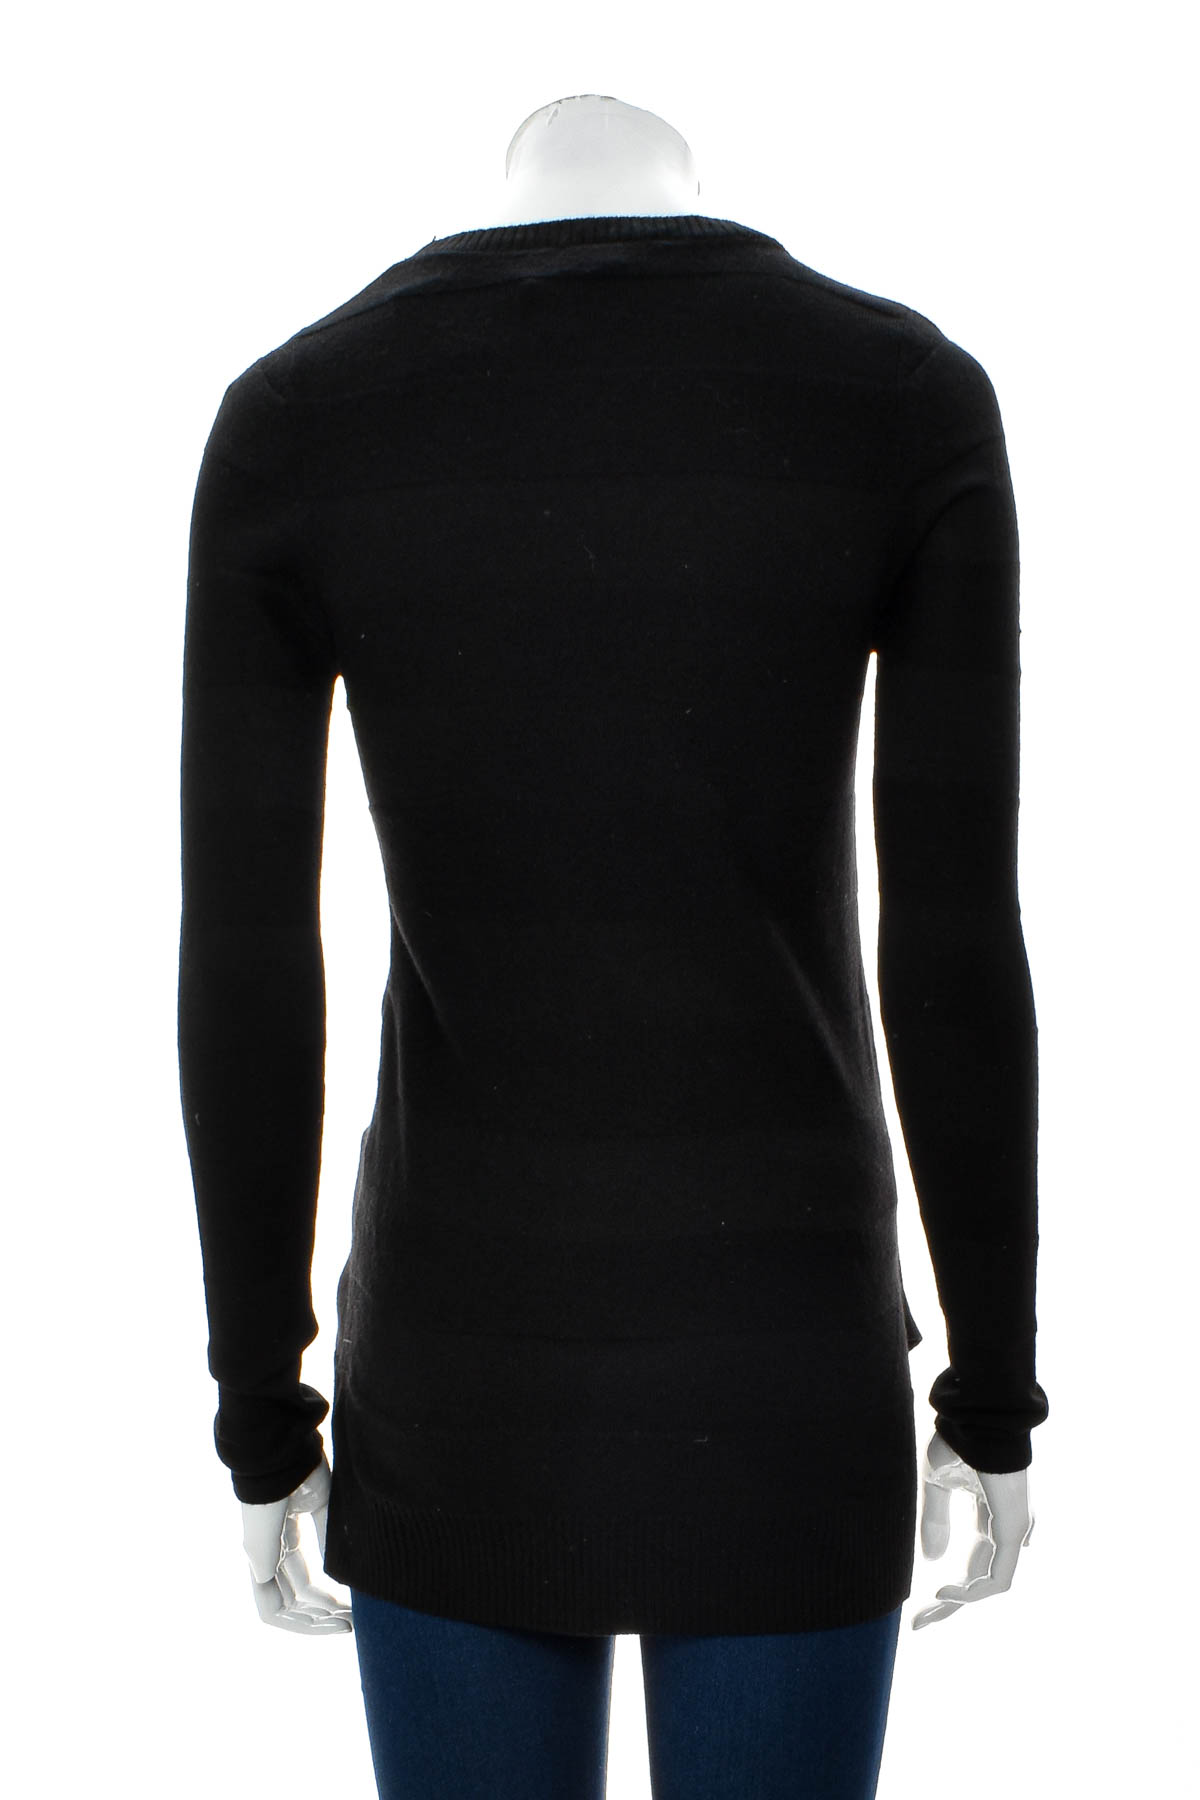 Women's tunic - THE LIMITED - 1